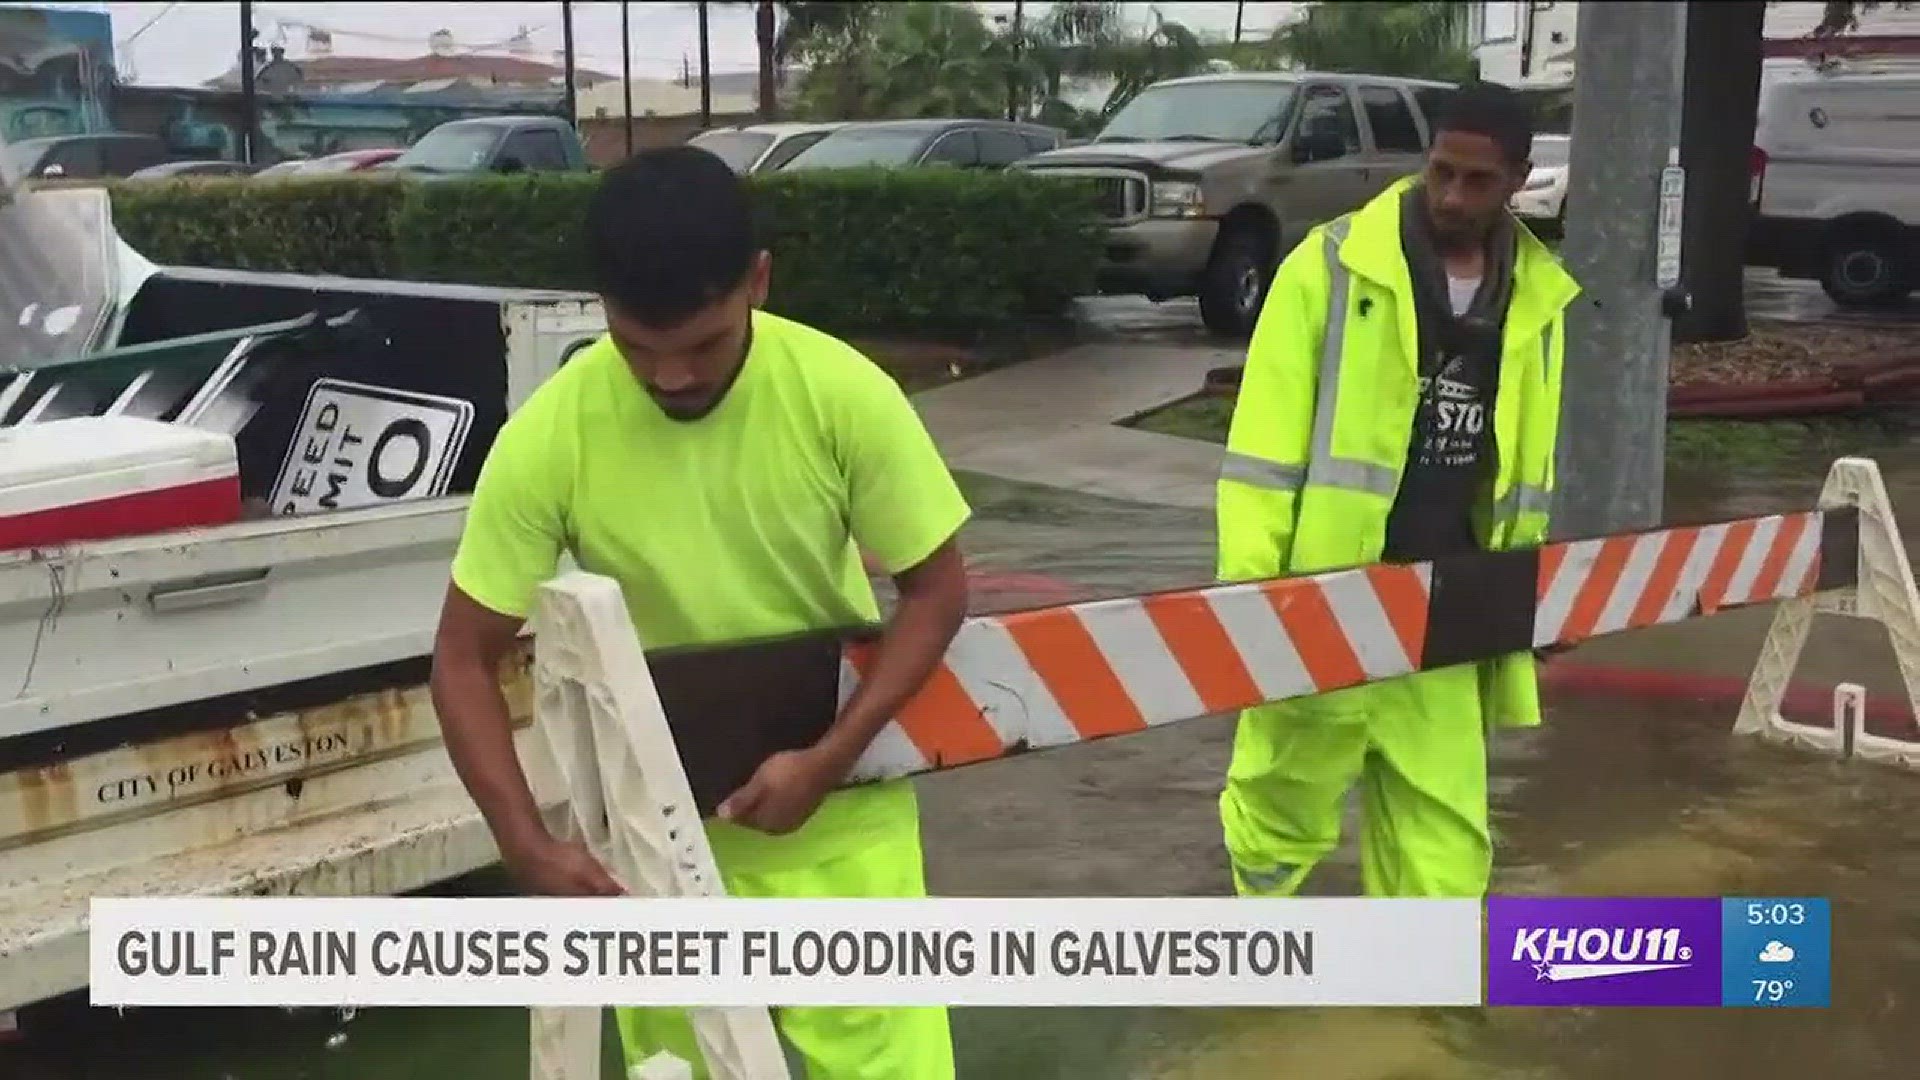 Many residents woke up to flooded streets on Galveston Island early Friday as rain bands from a disturbance in the Gulf moved ashore.